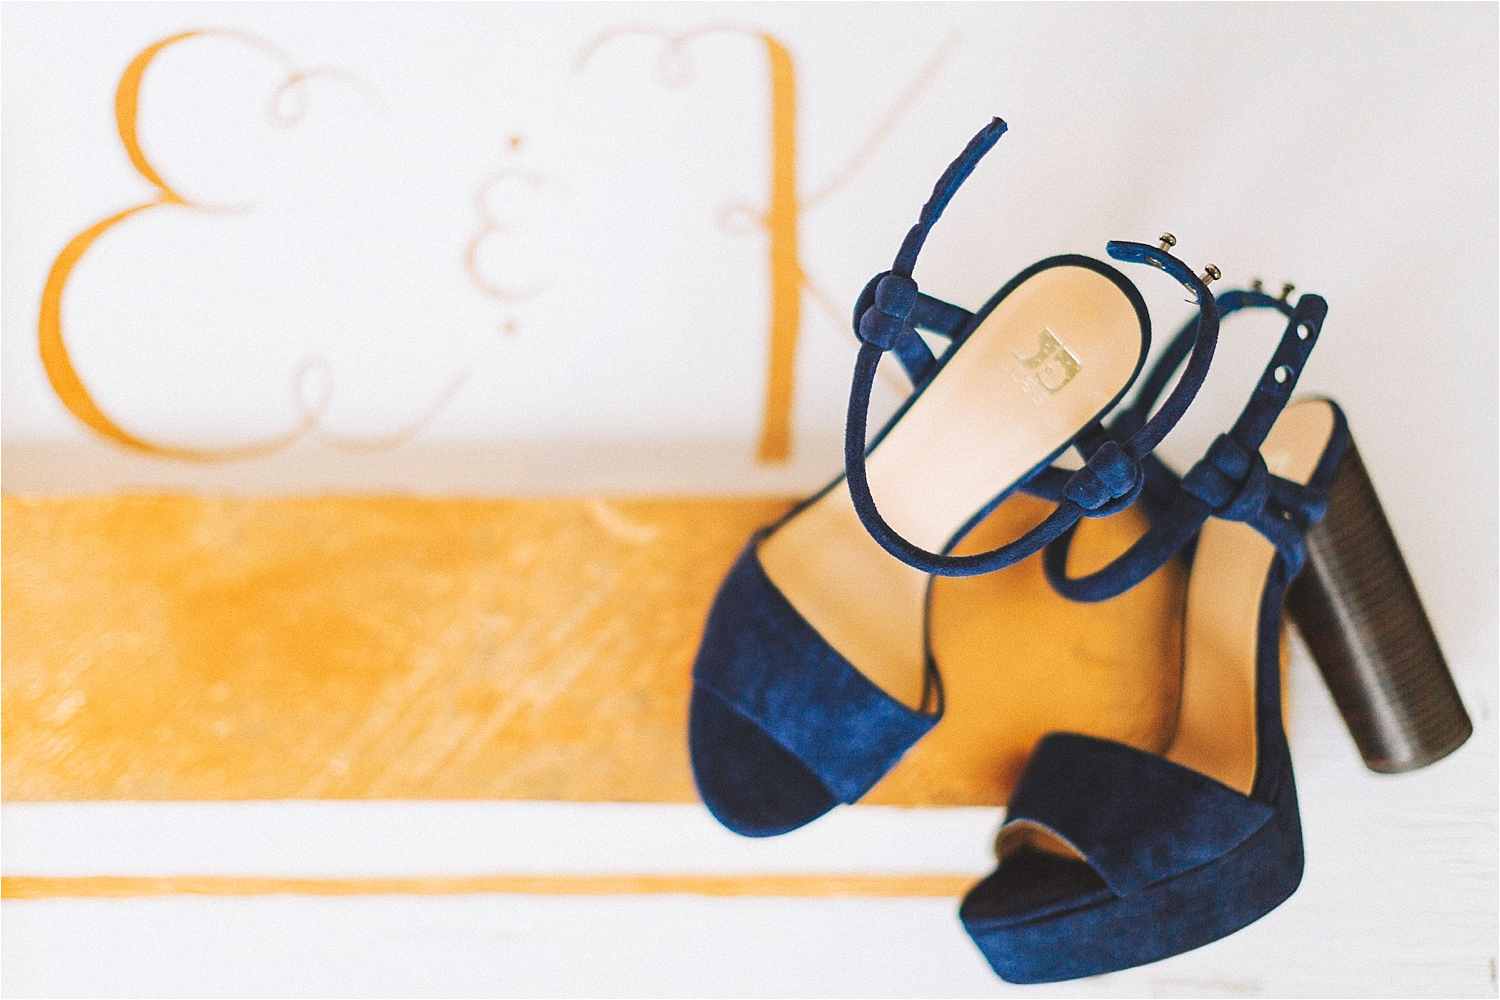 Blue shoes for rustic maui wedding